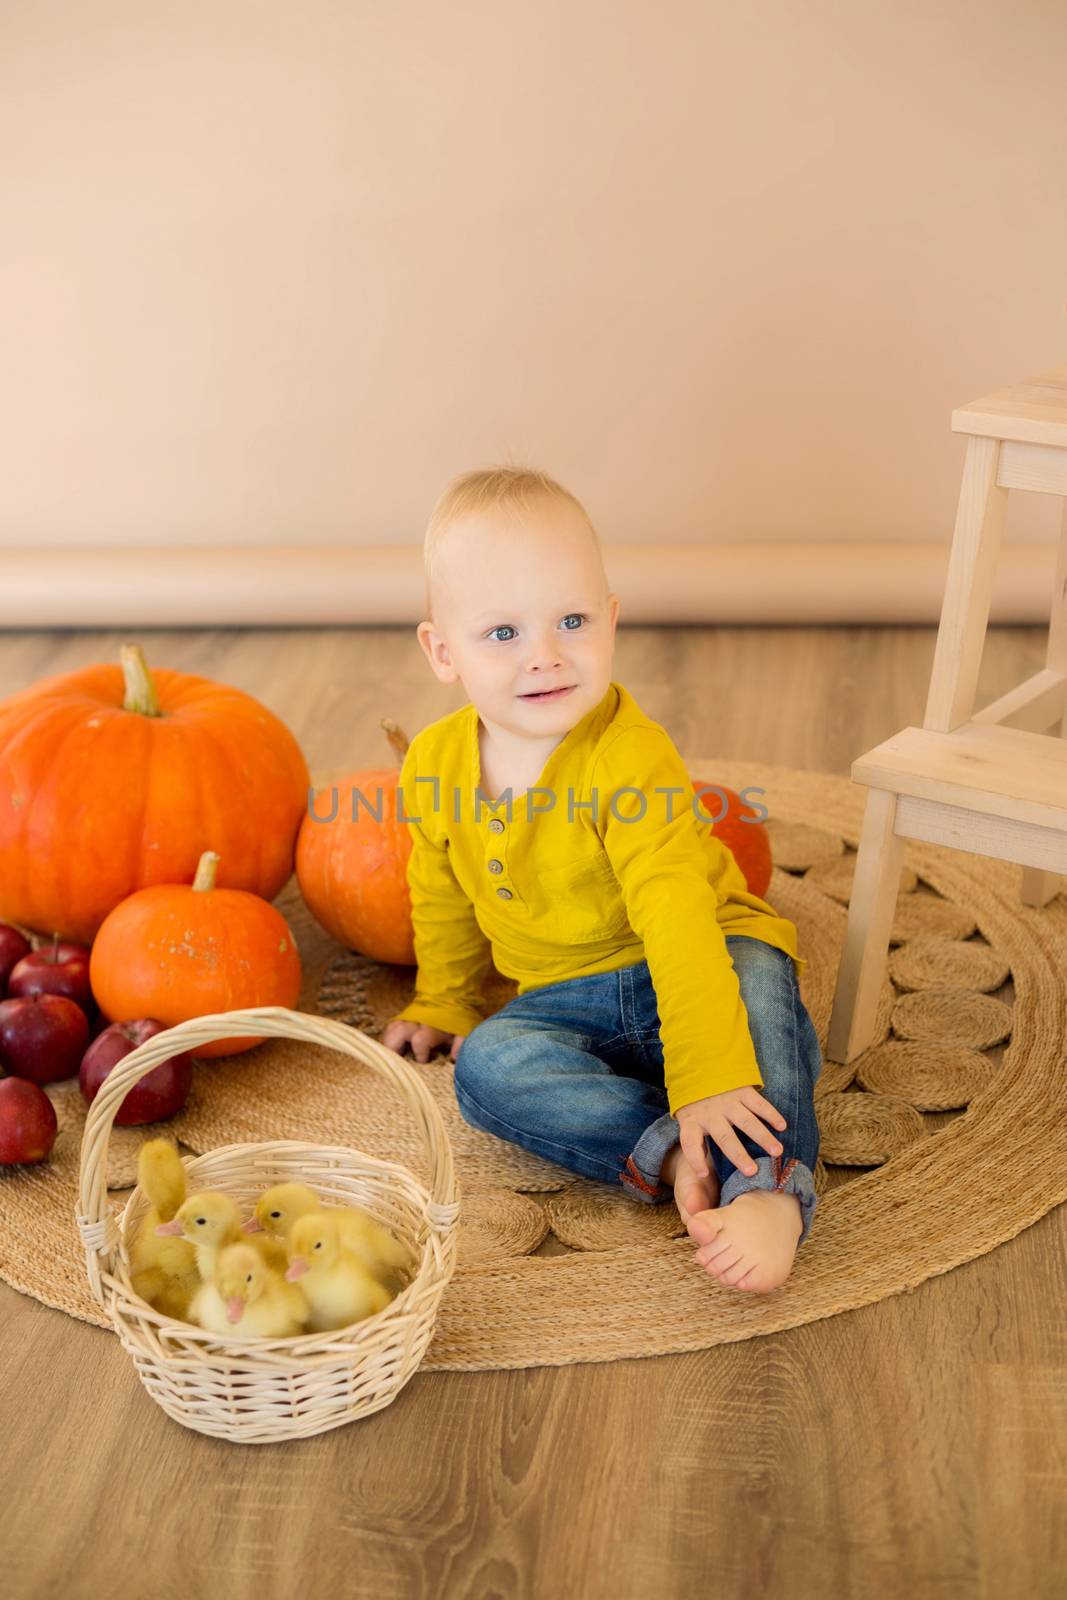 A little boy sits among pumpkins with a basket of ducklings by galinasharapova